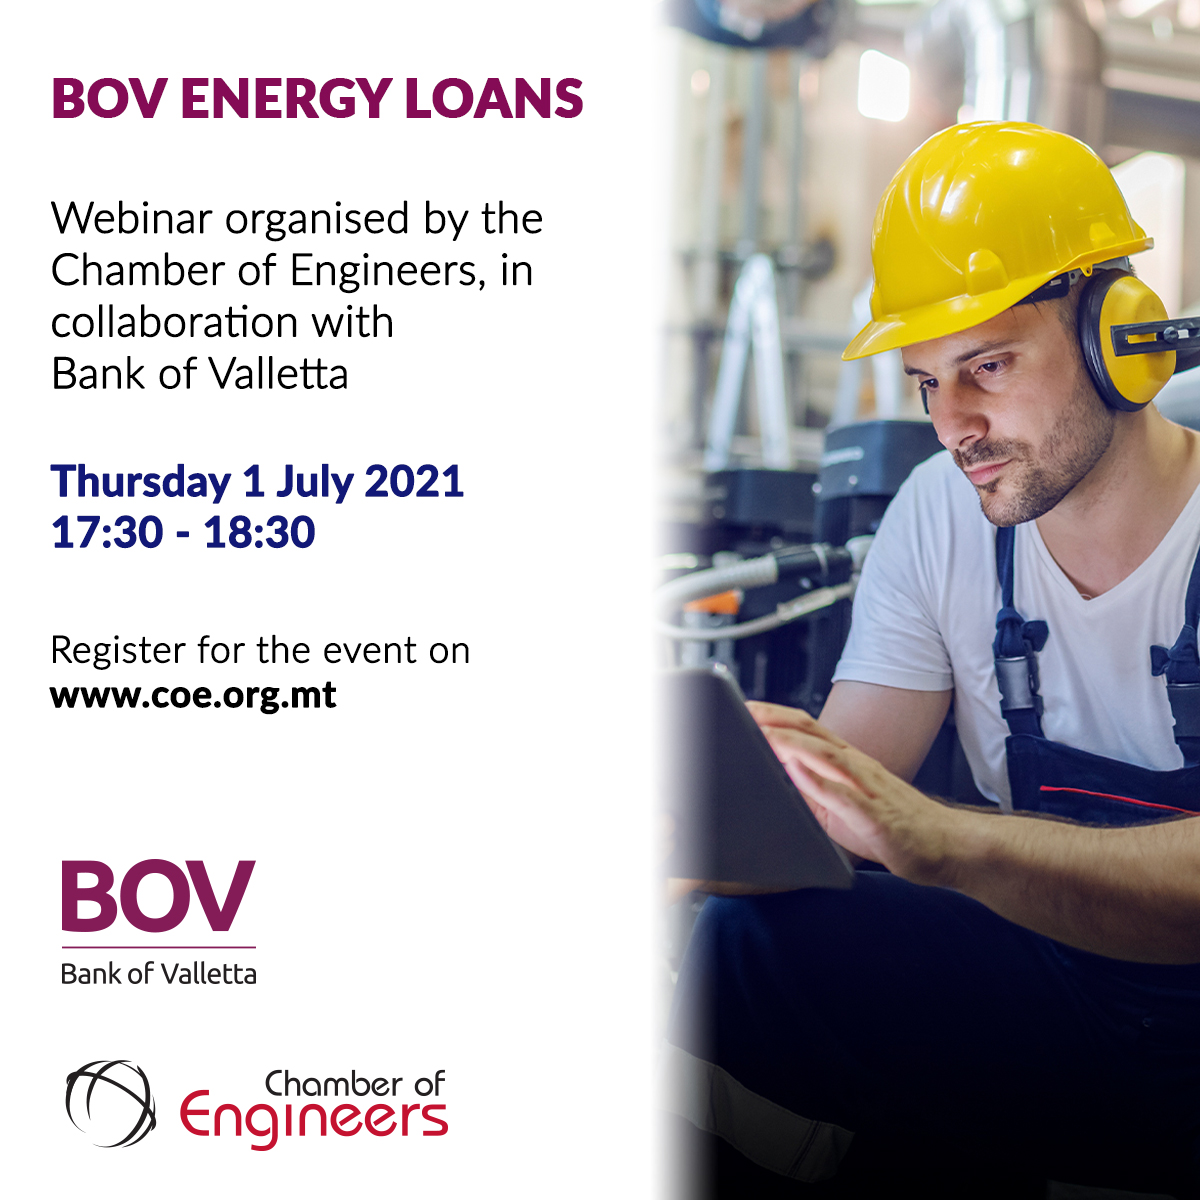 Banking on green with the BOV Energy Loans